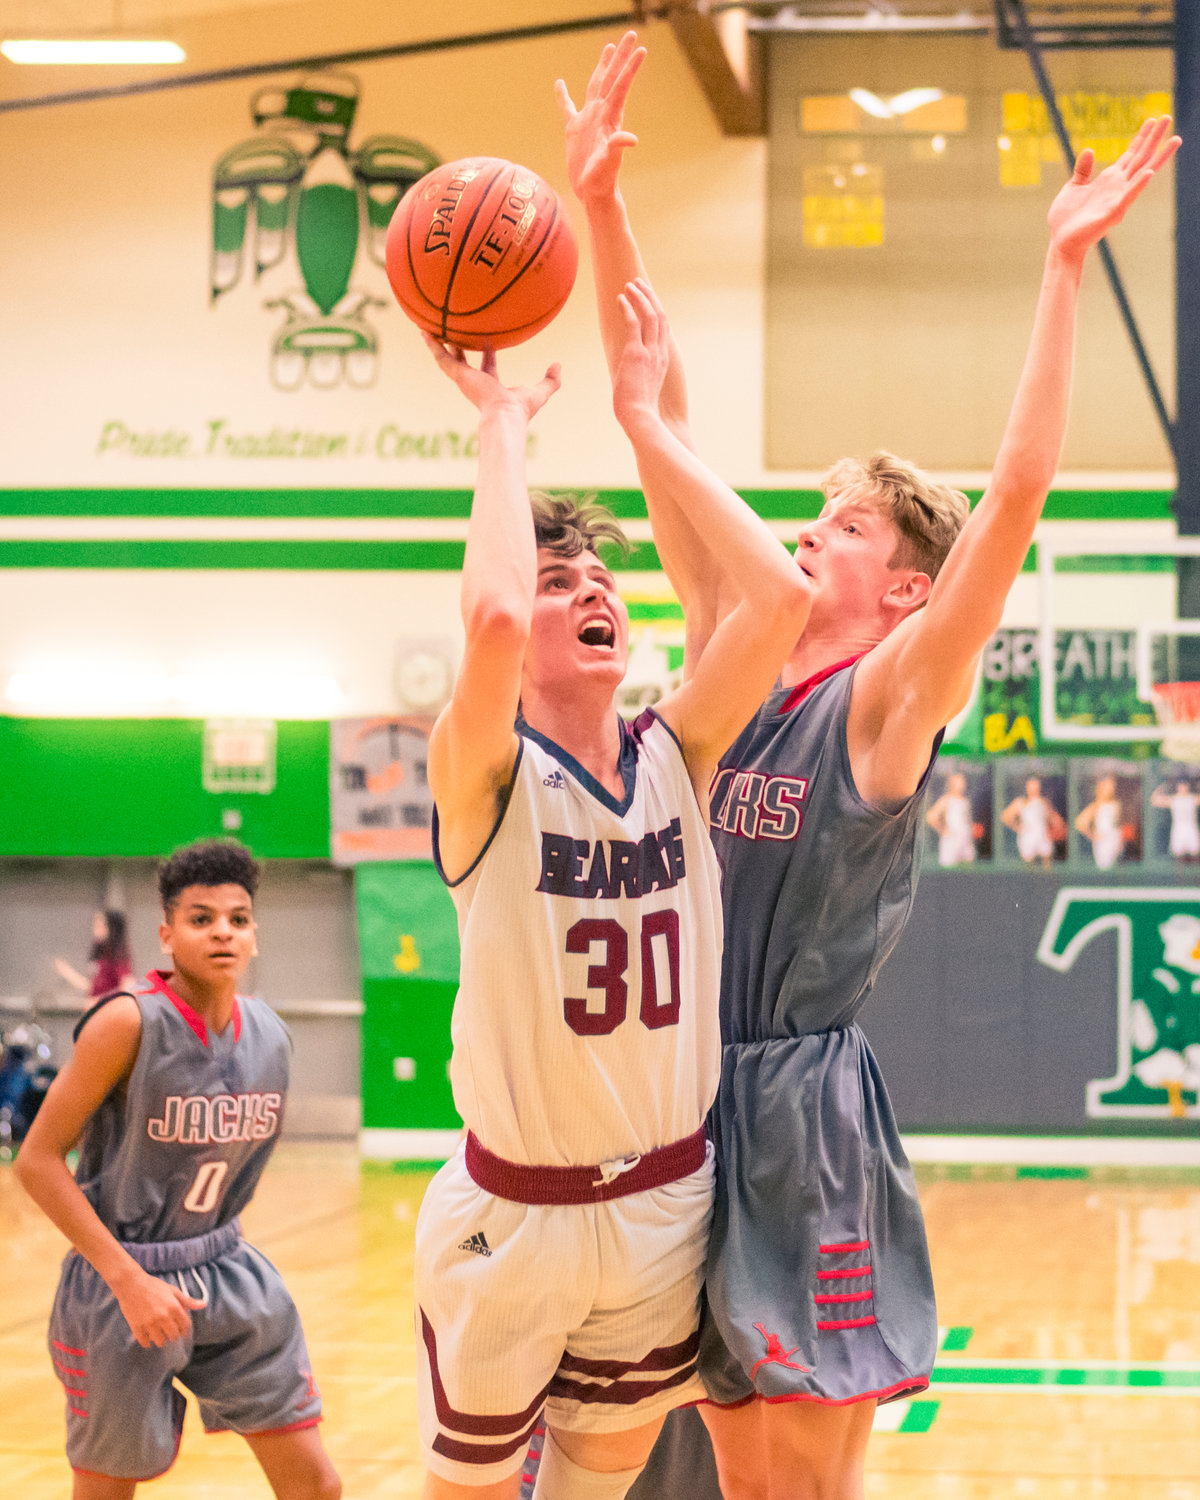 W.F. West's Tyler Speck (30) is shutdown on his way to the hoop during a game against Jacks Thursday night at Tumwater High School.